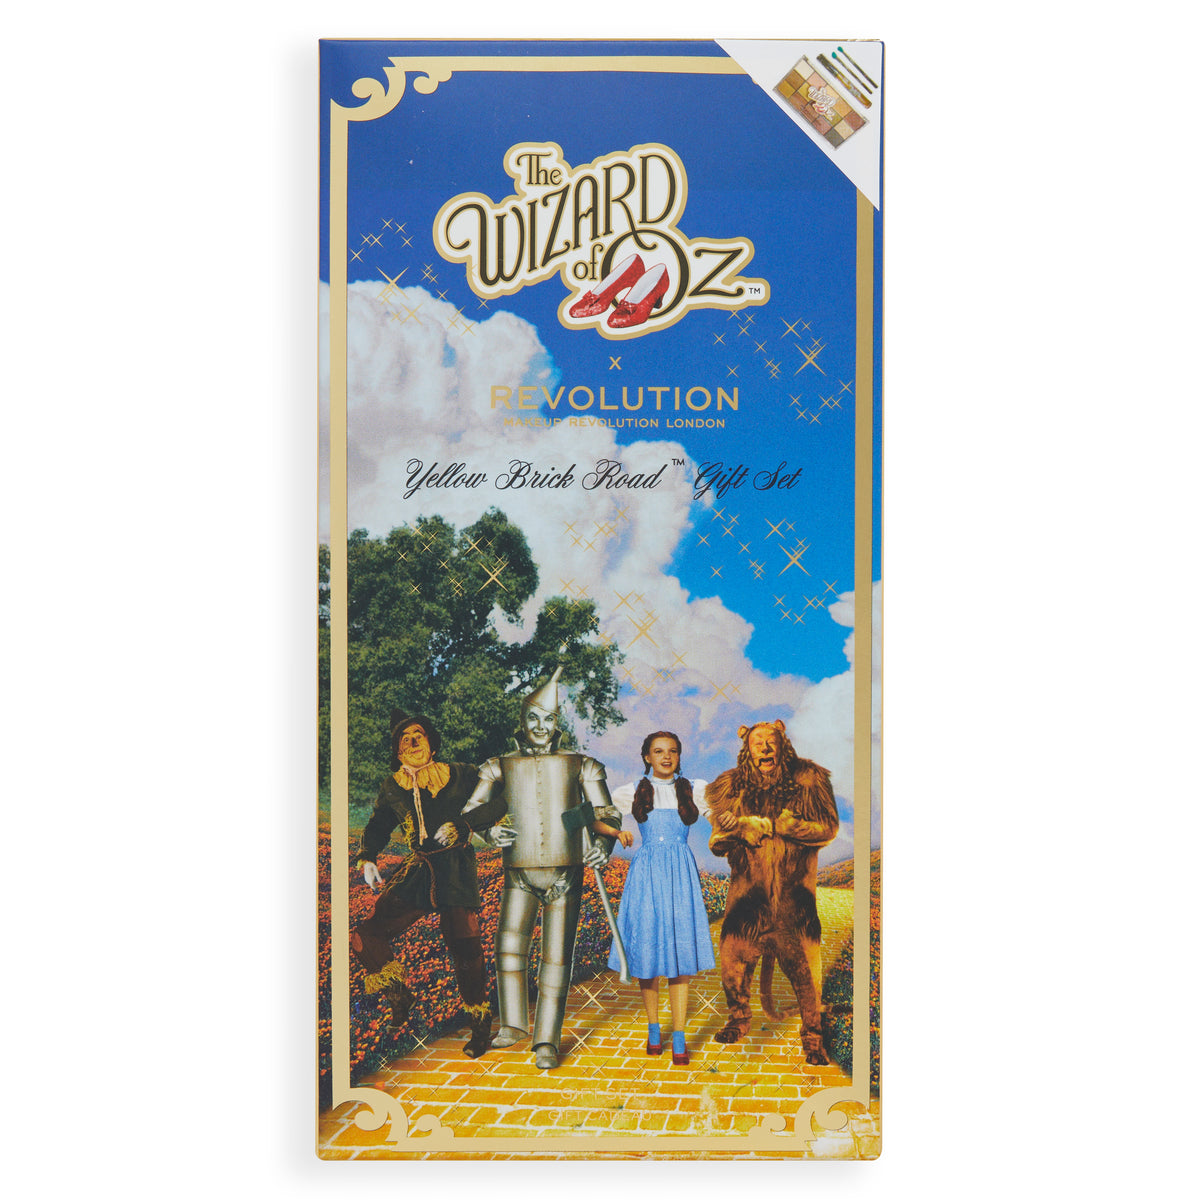 SET DE MAQUILLAJE YELLOW BRICK ROAD - OUTLET MAKE UP REVOLUTION X WIZARD OF OZ